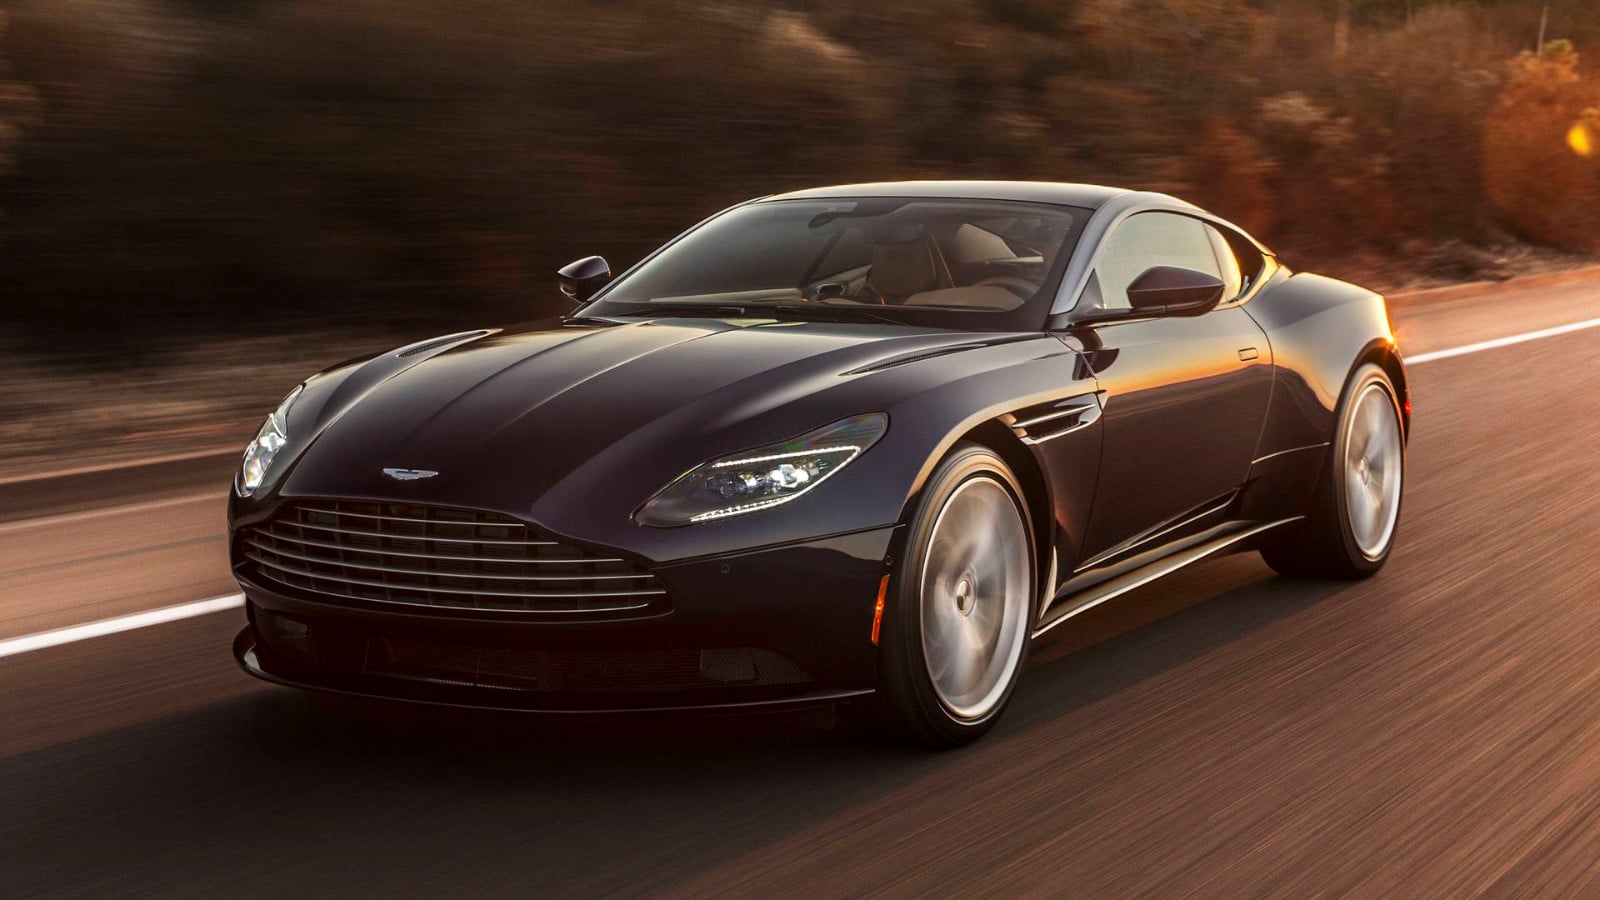 Geely increased its stake in Aston Martin to 17%, becoming the third-largest shareholder